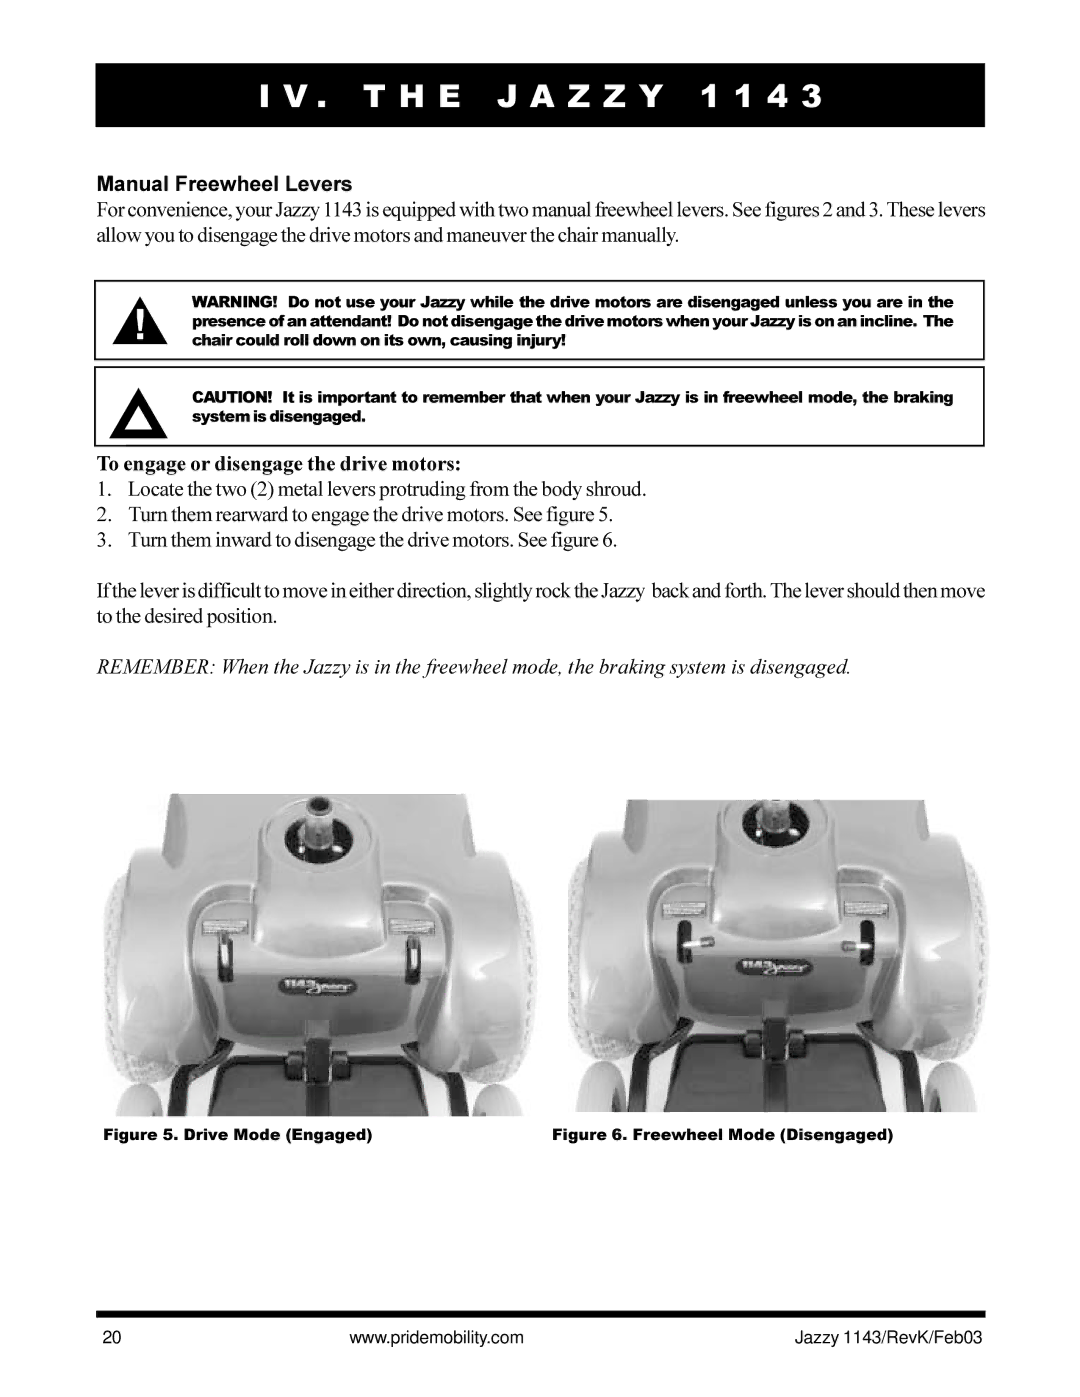 Pride Mobility Jazzy 1143 owner manual Manual Freewheel Levers, To engage or disengage the drive motors 